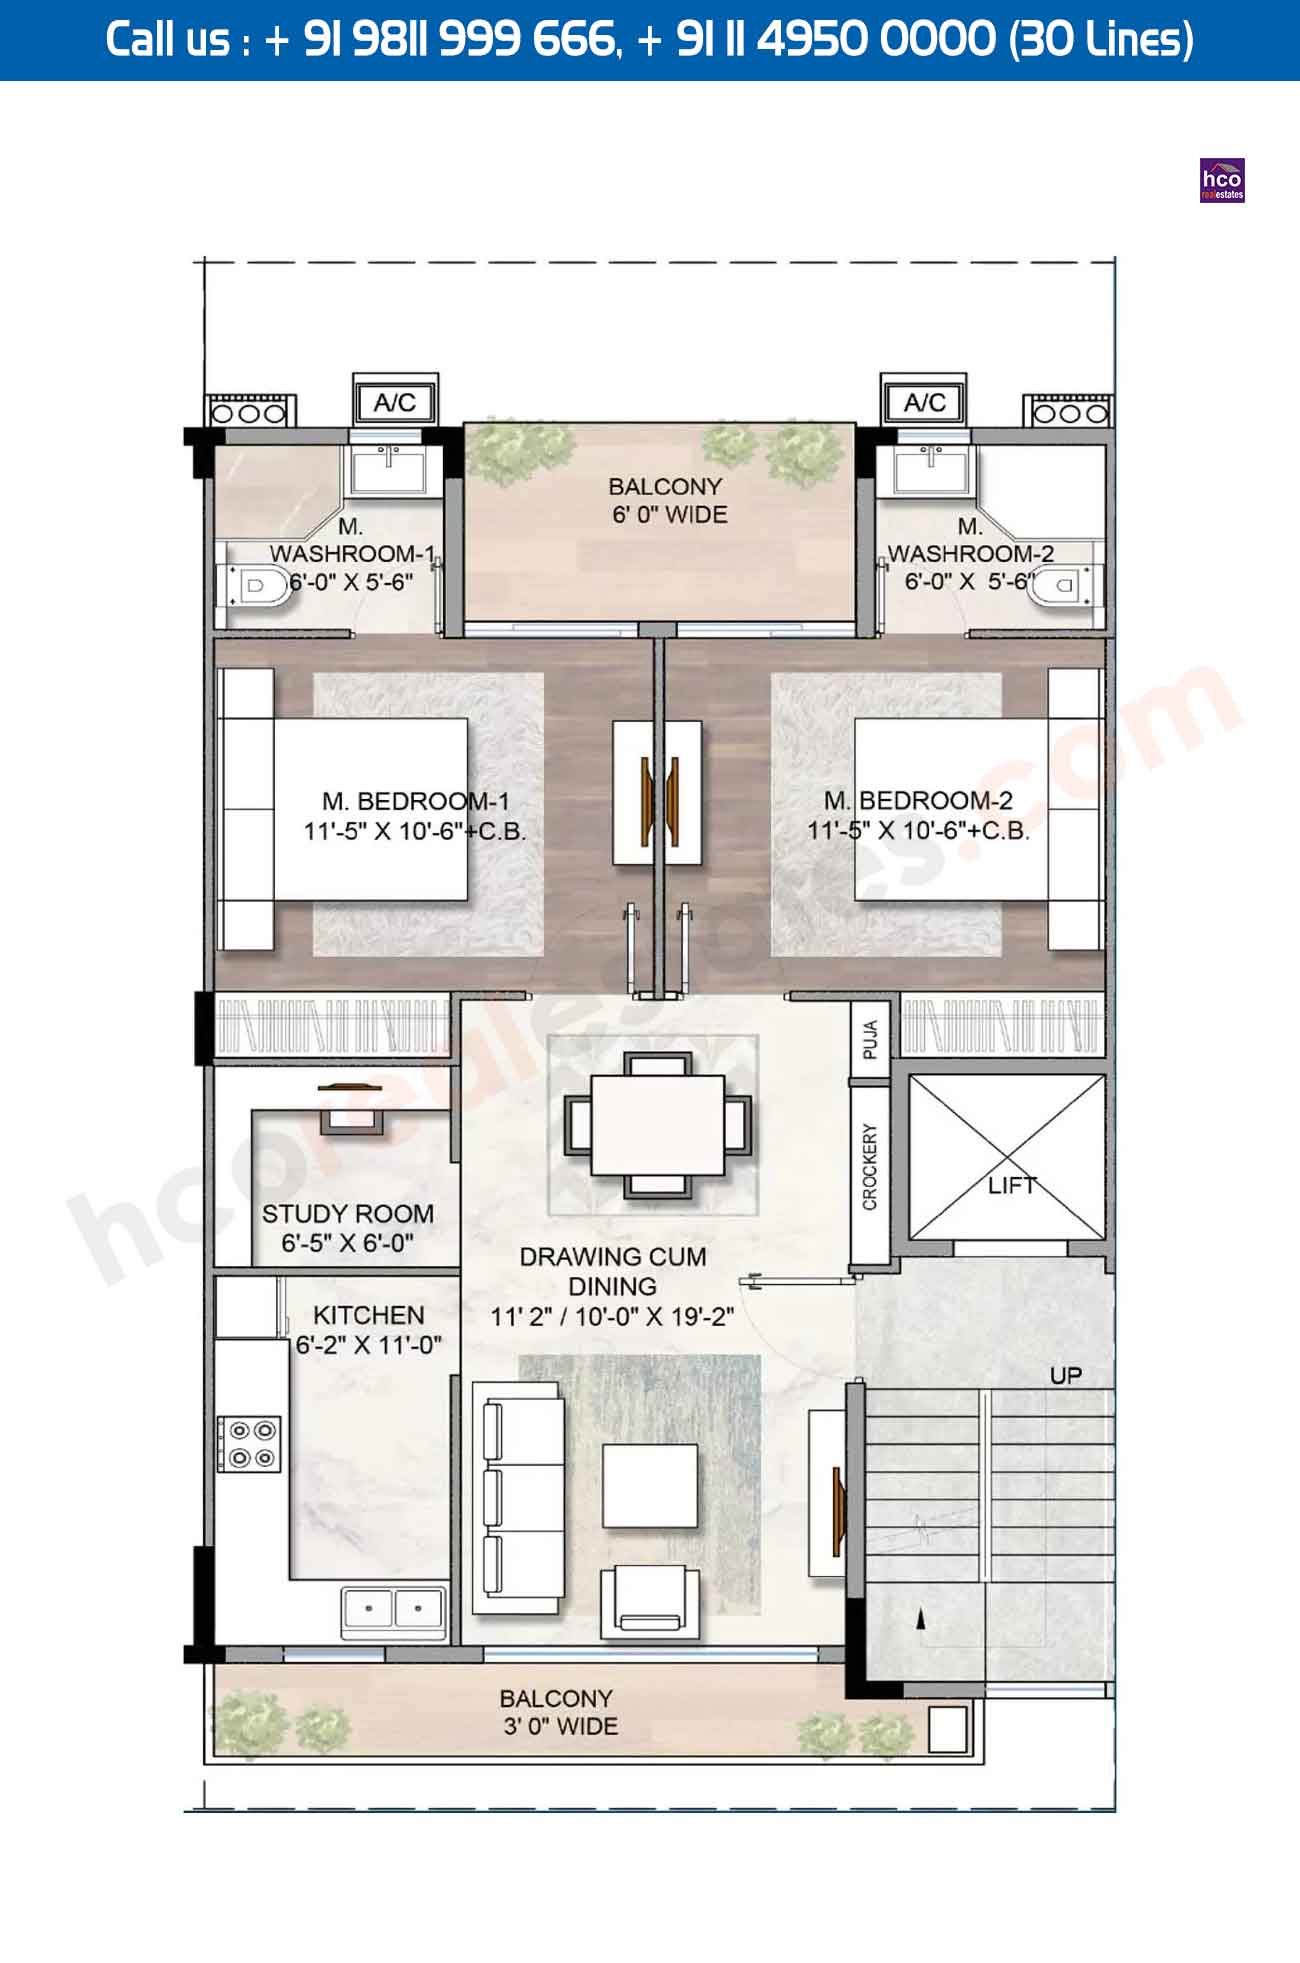 Floor Plan & Layout Plan in M3m Gold Rush Sector 89